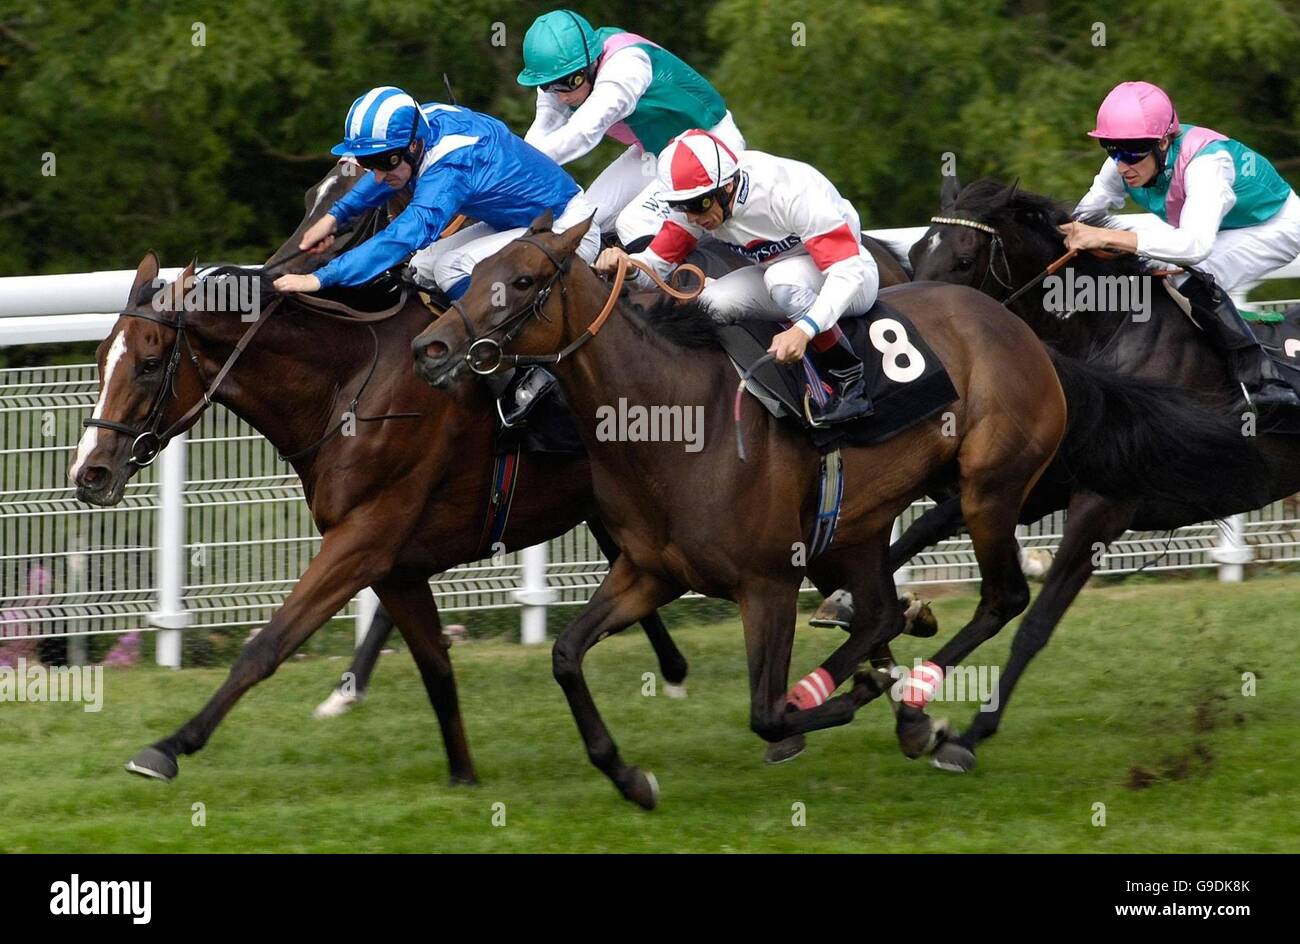 Red Evie, ridden by Frankie Dettori (number 8) wins the Oak Tree Stakes at Goodwood racecourse. Stock Photo